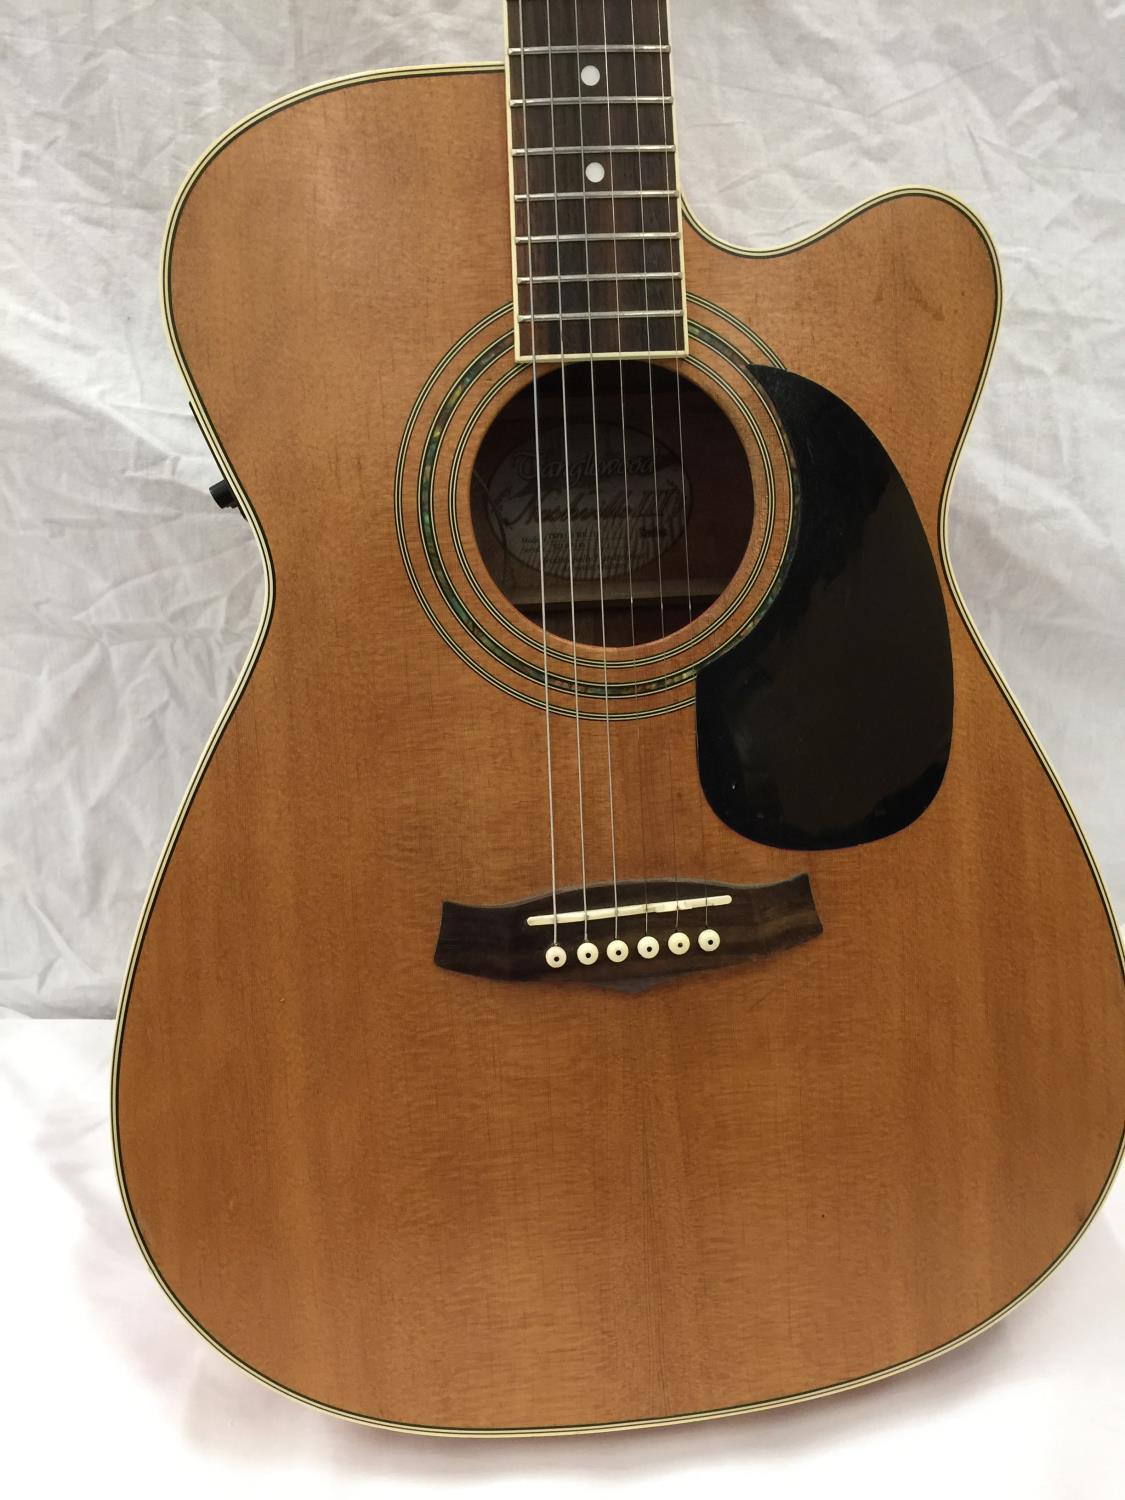 A TANGLEWOOD NASHVILLE SEMI ACOUSTIC GUITAR - Image 4 of 15